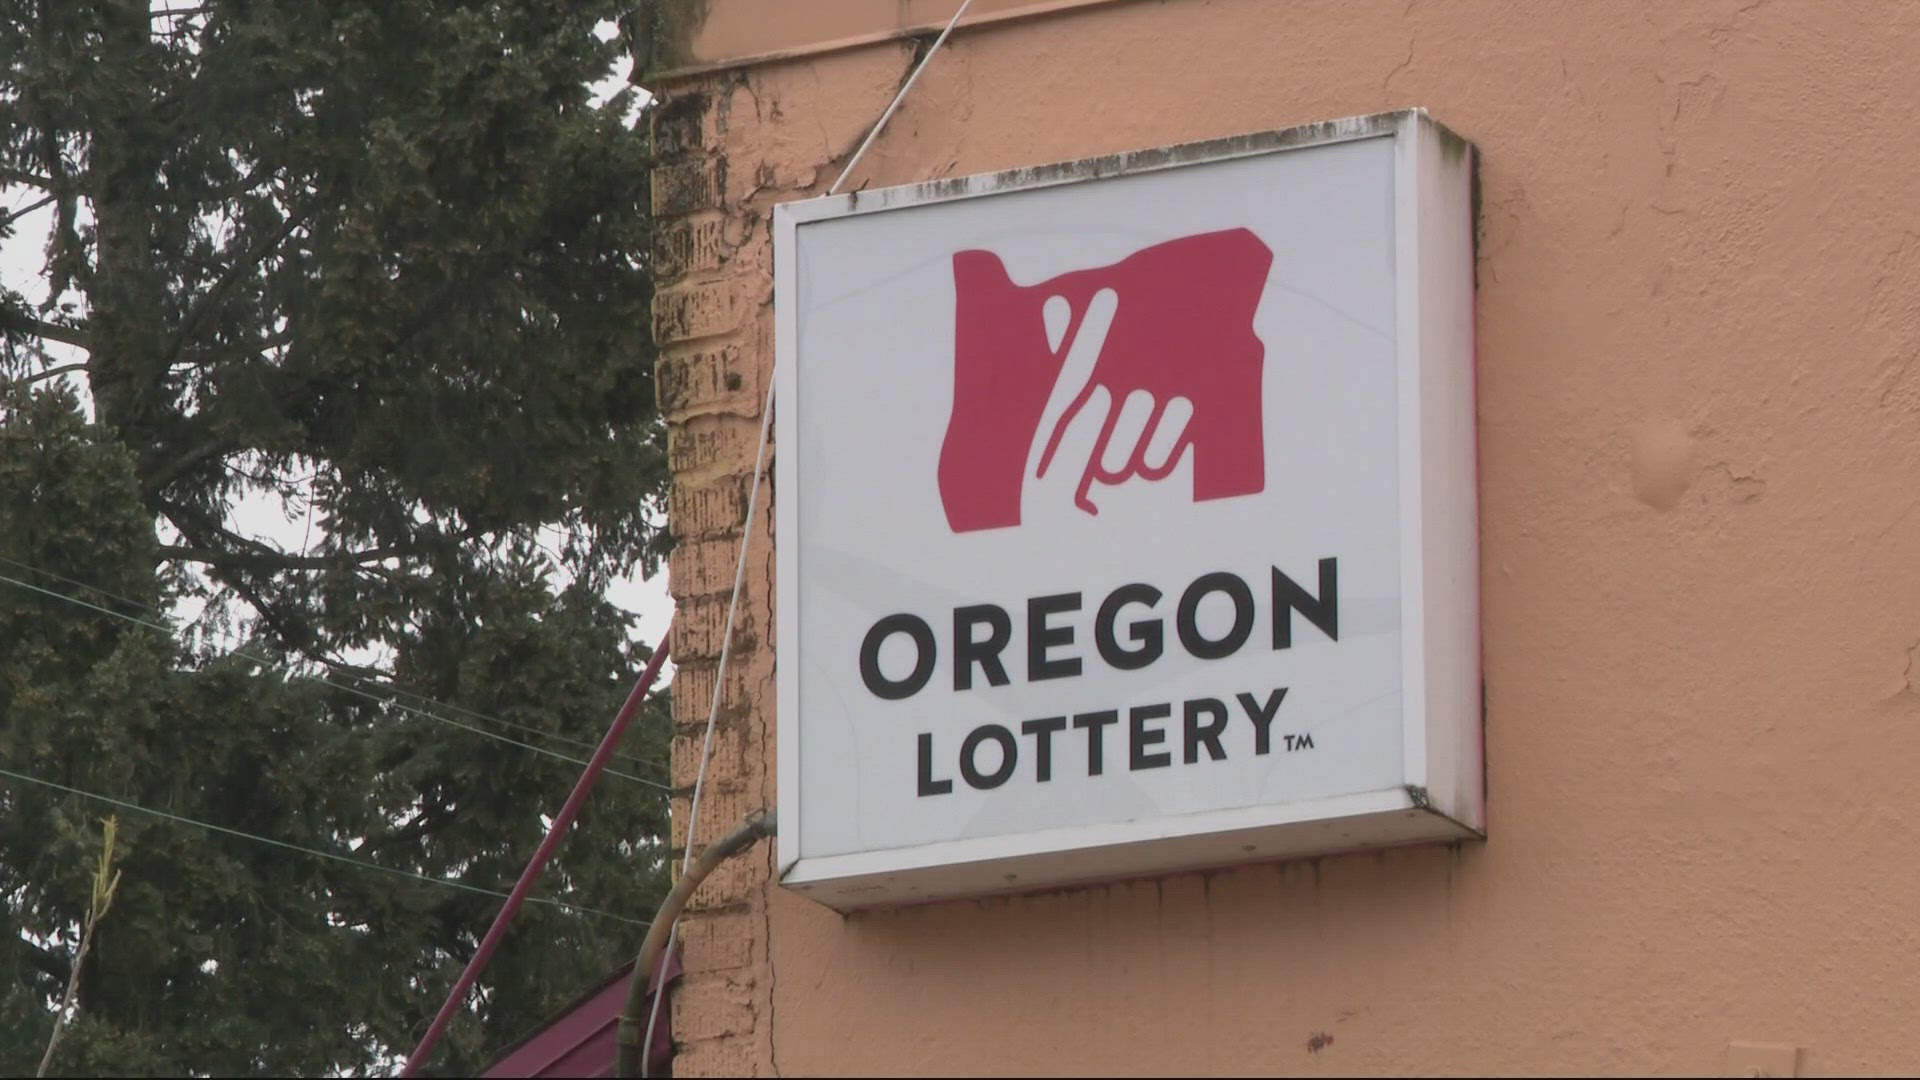 The winning Powerball ticket was purchased in Portland on Saturday in the 97218-area code. The winner has a year to come forward and claim their prize.